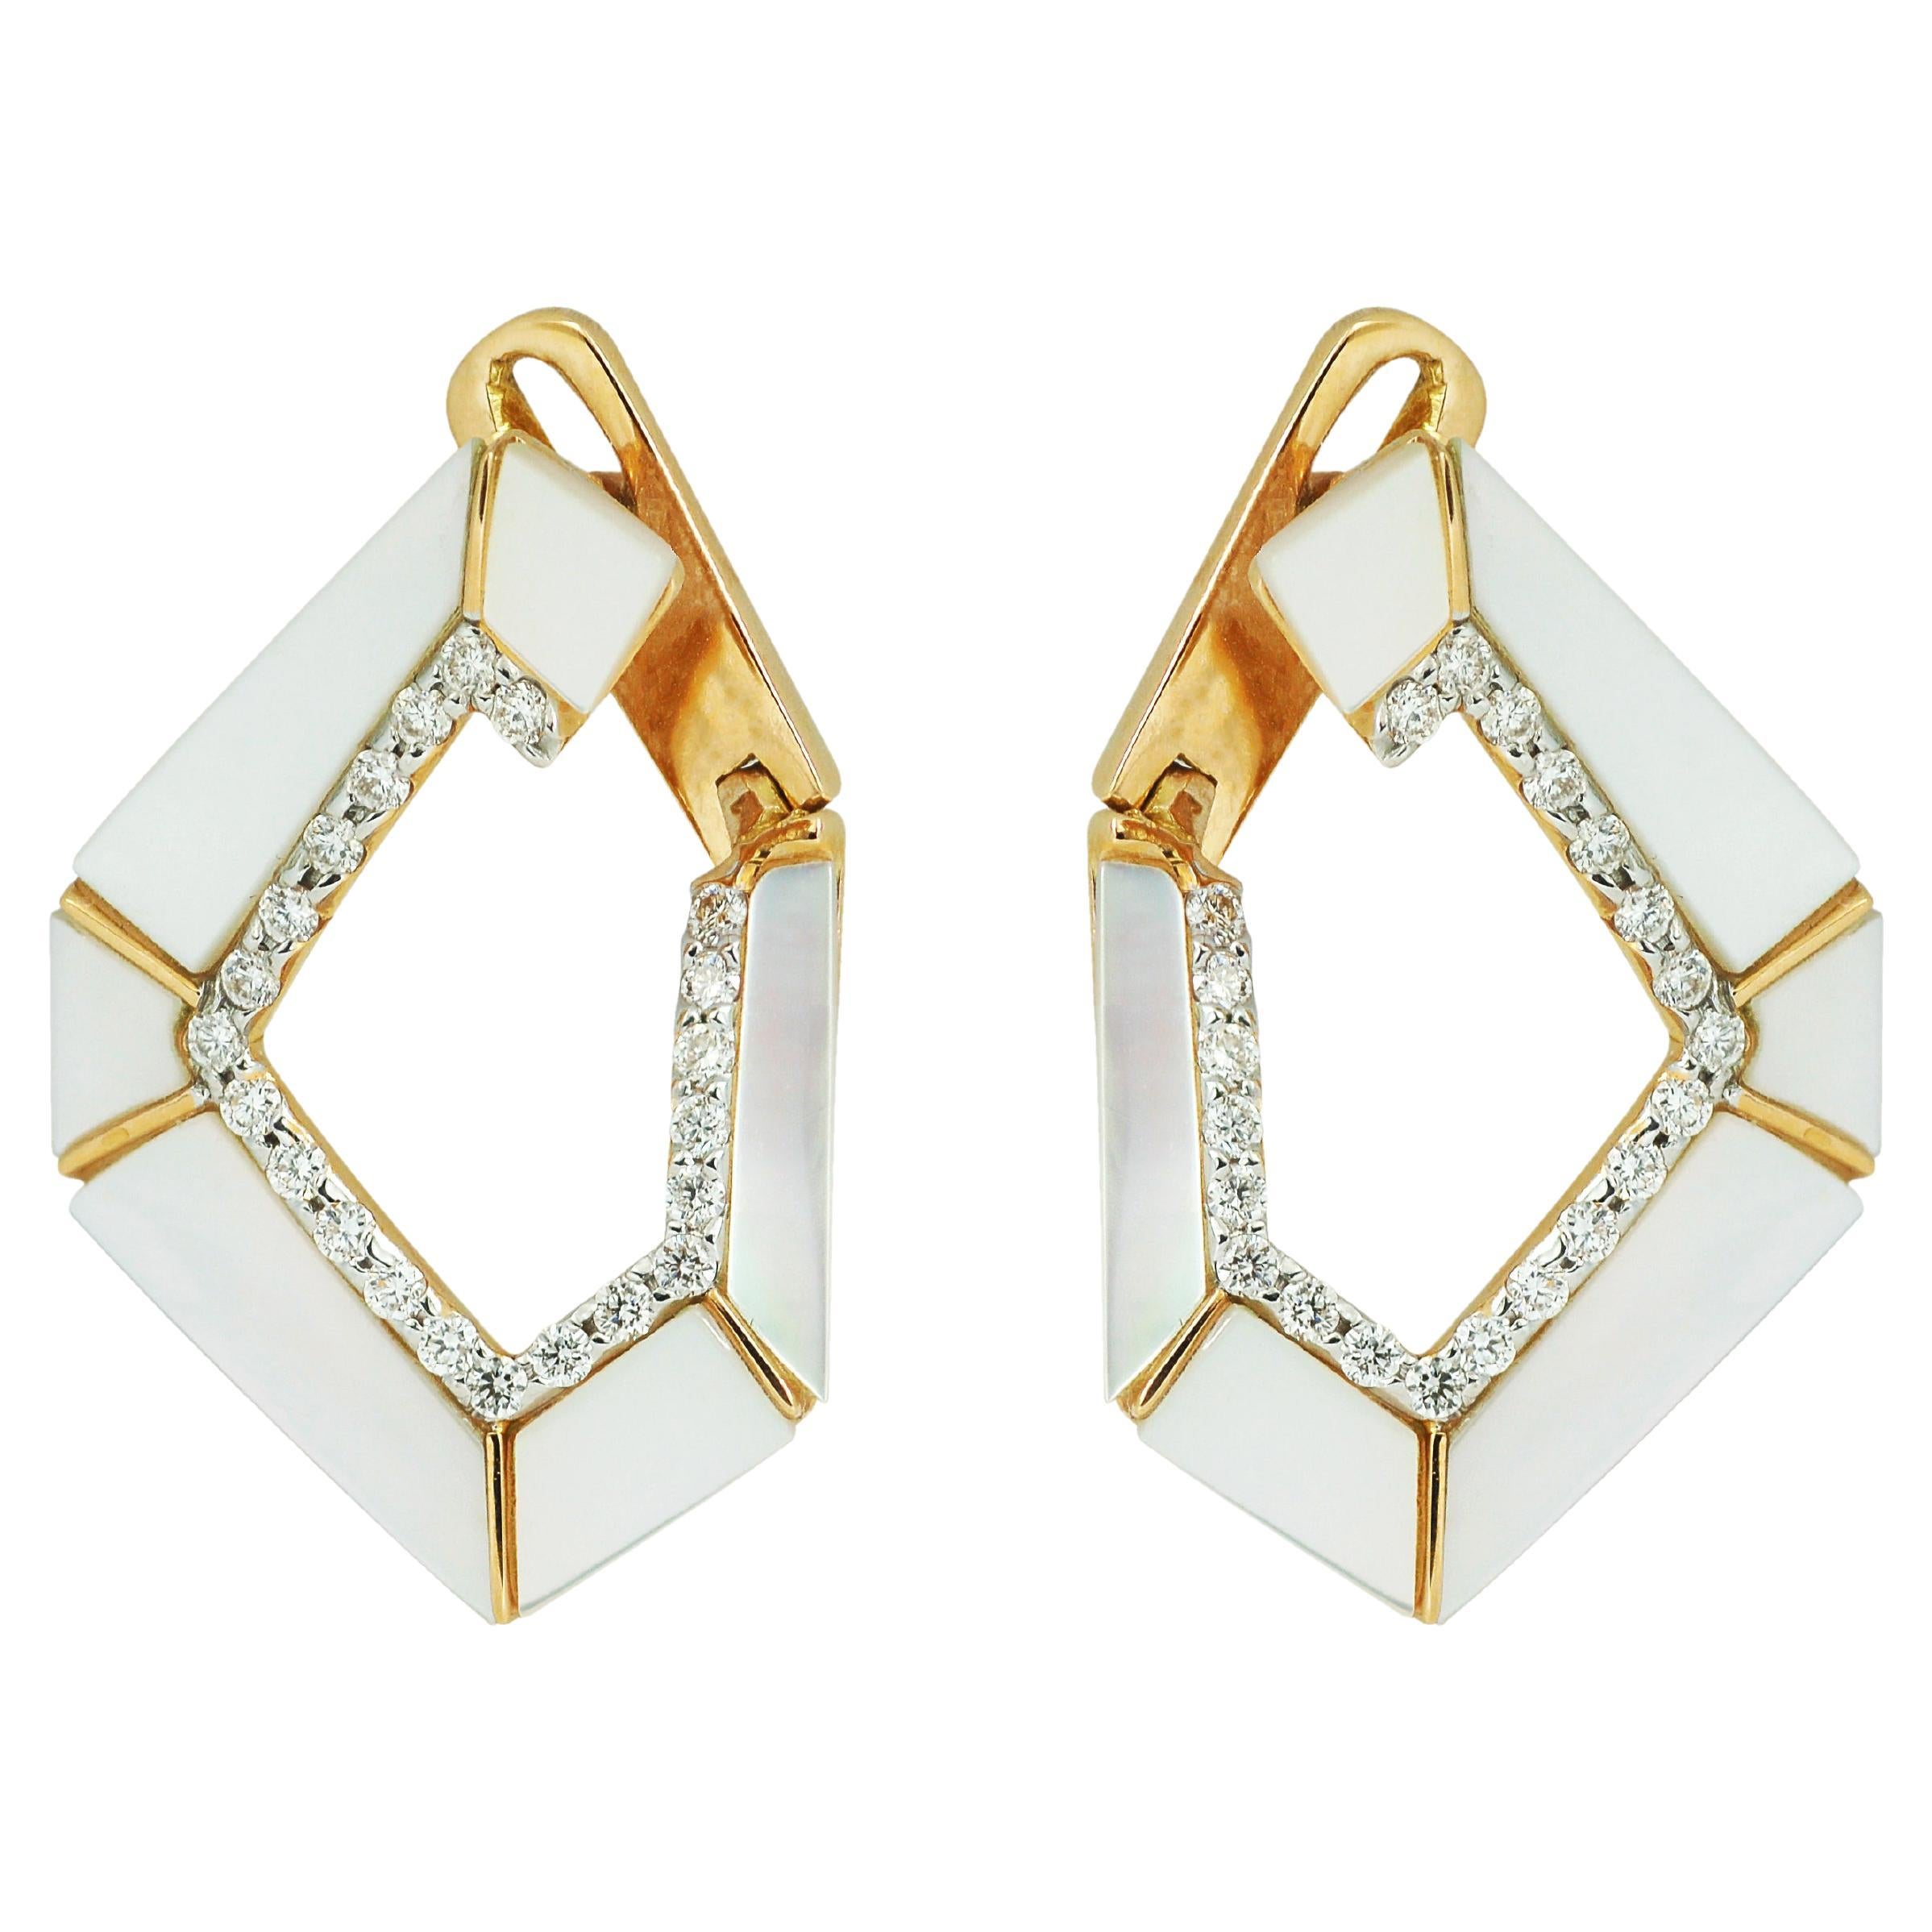 Origami Link No. 5 Mother of Pearl and Diamond Grande Earrings 18k Gold For Sale